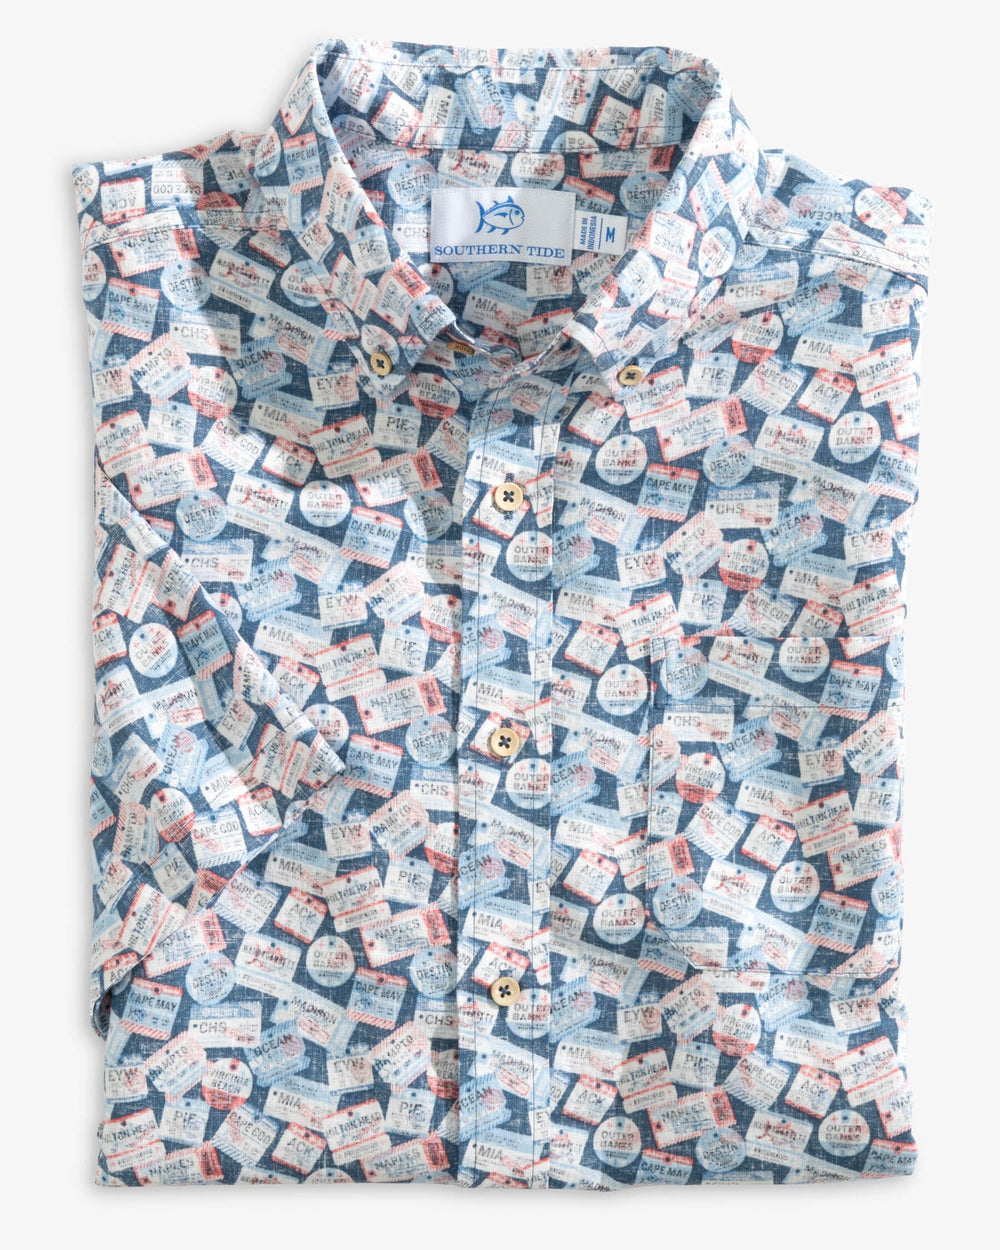 The folded view of the Southern Tide Welcome Aboard Short Sleeve Button Down Sport Shirt by Southern Tide - Aged Denim